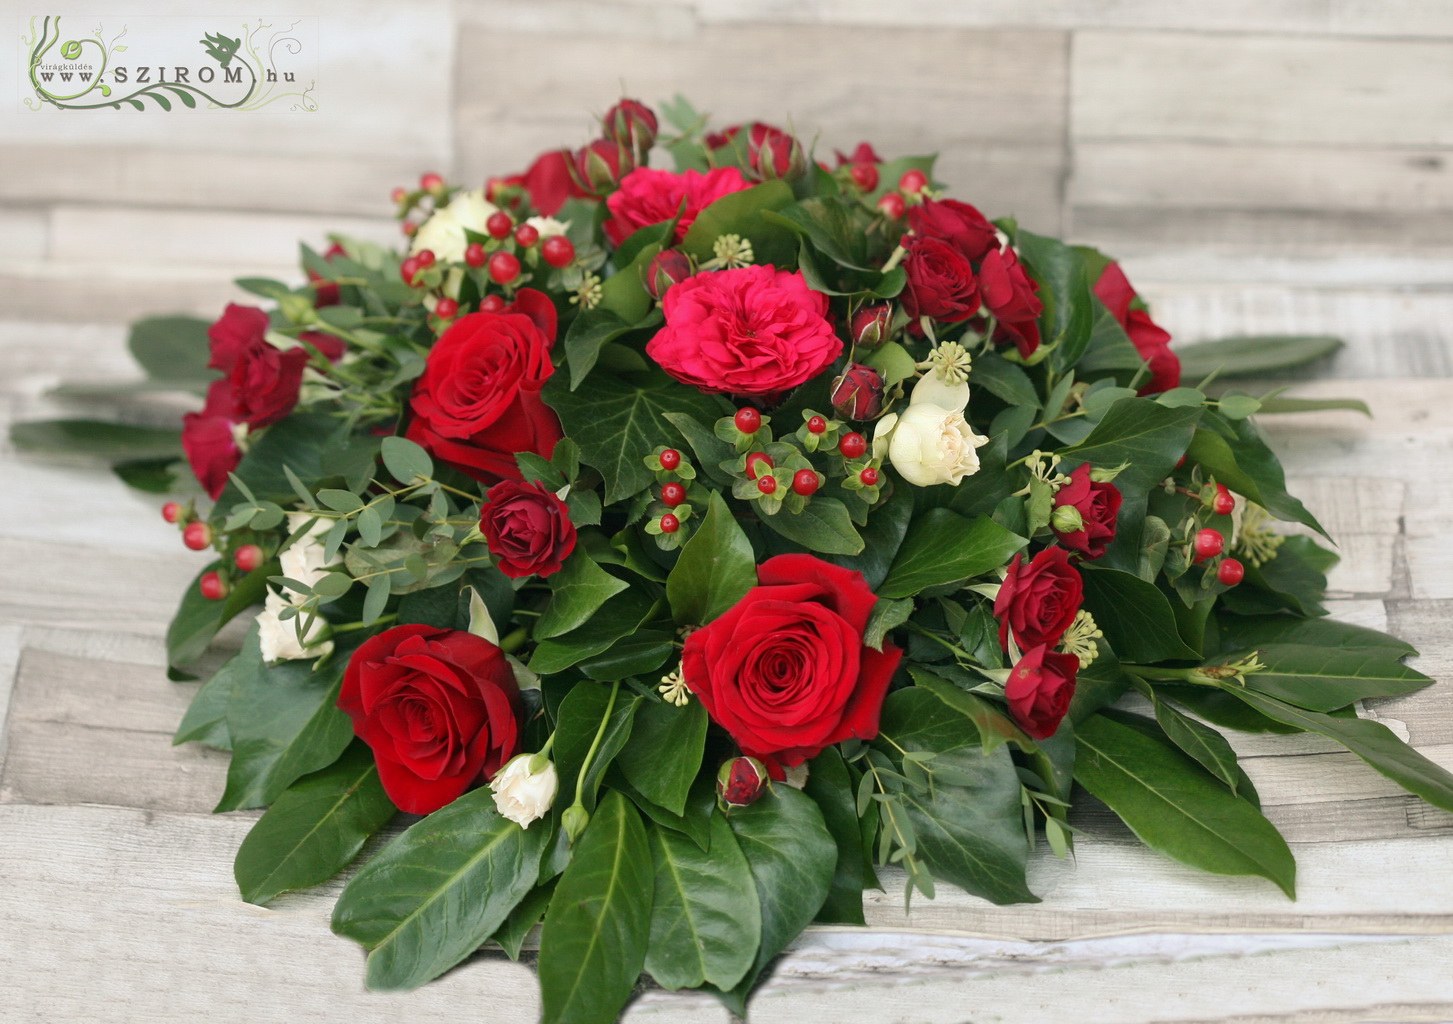 flower delivery Budapest - Main table centerpiece of red roses , spray roses (red), wedding